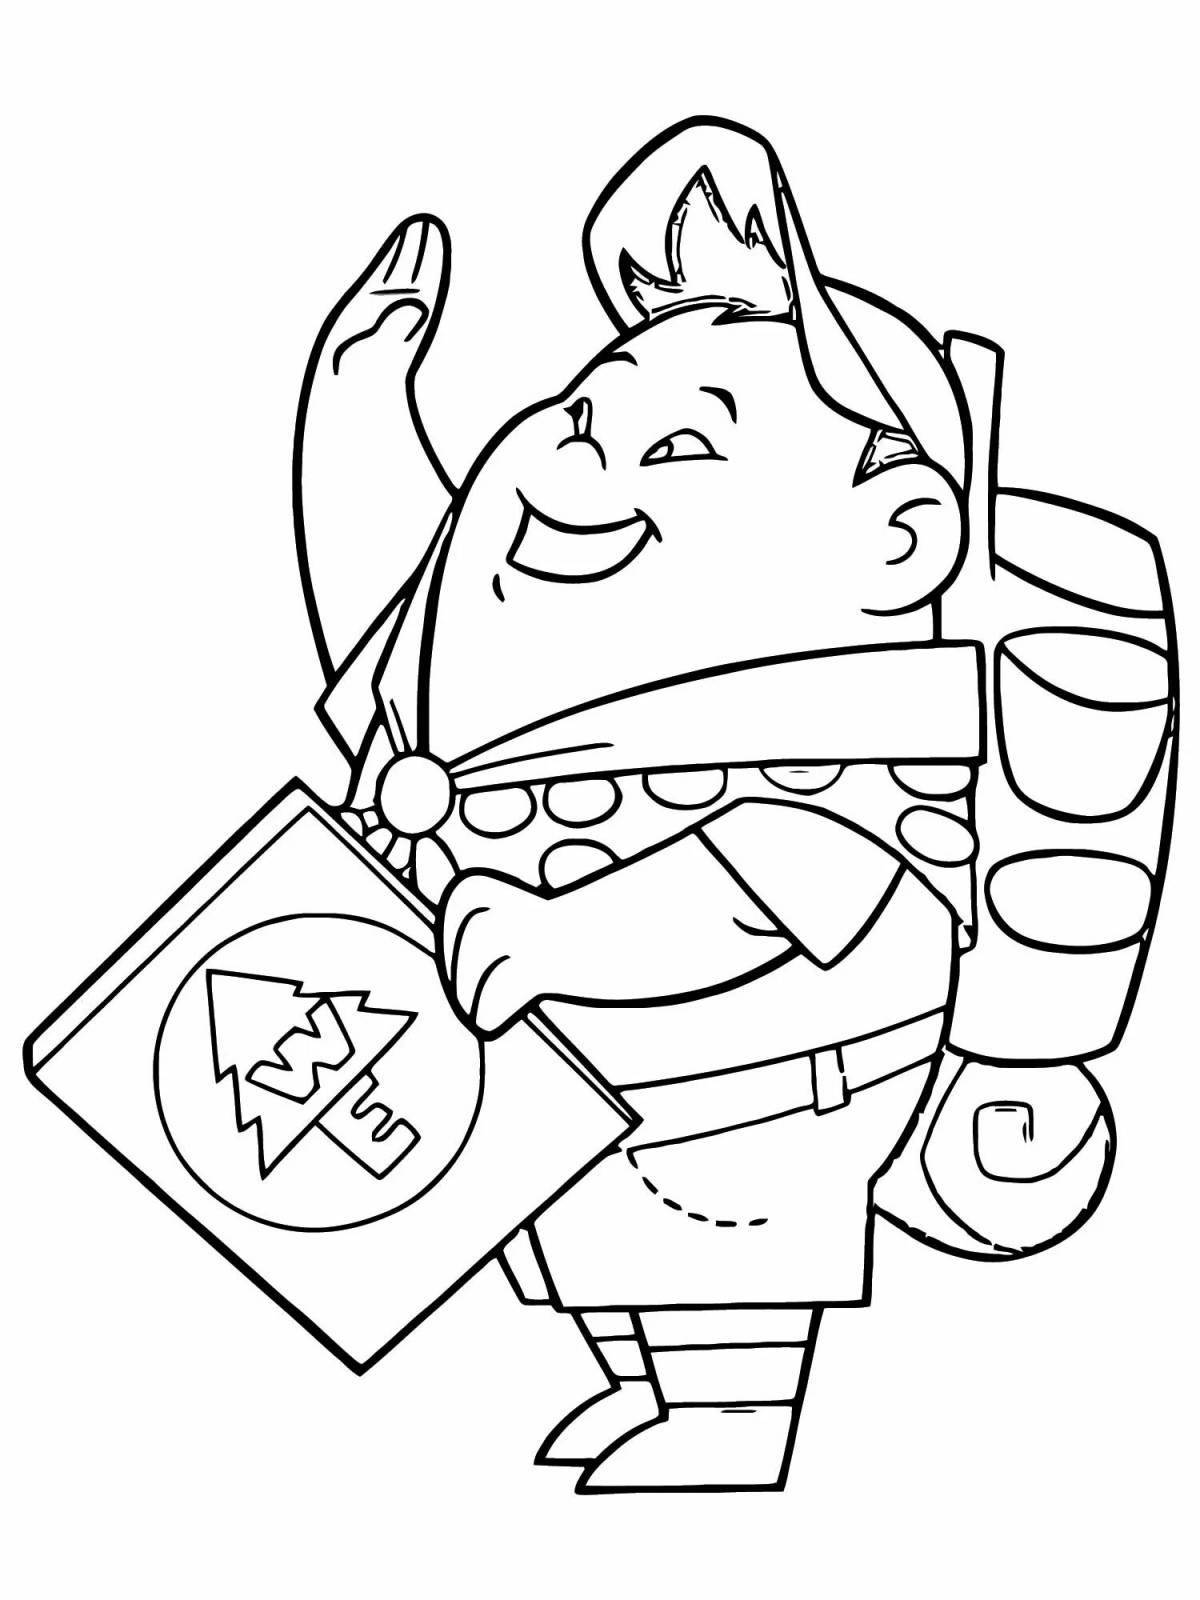 Solar coloring page up